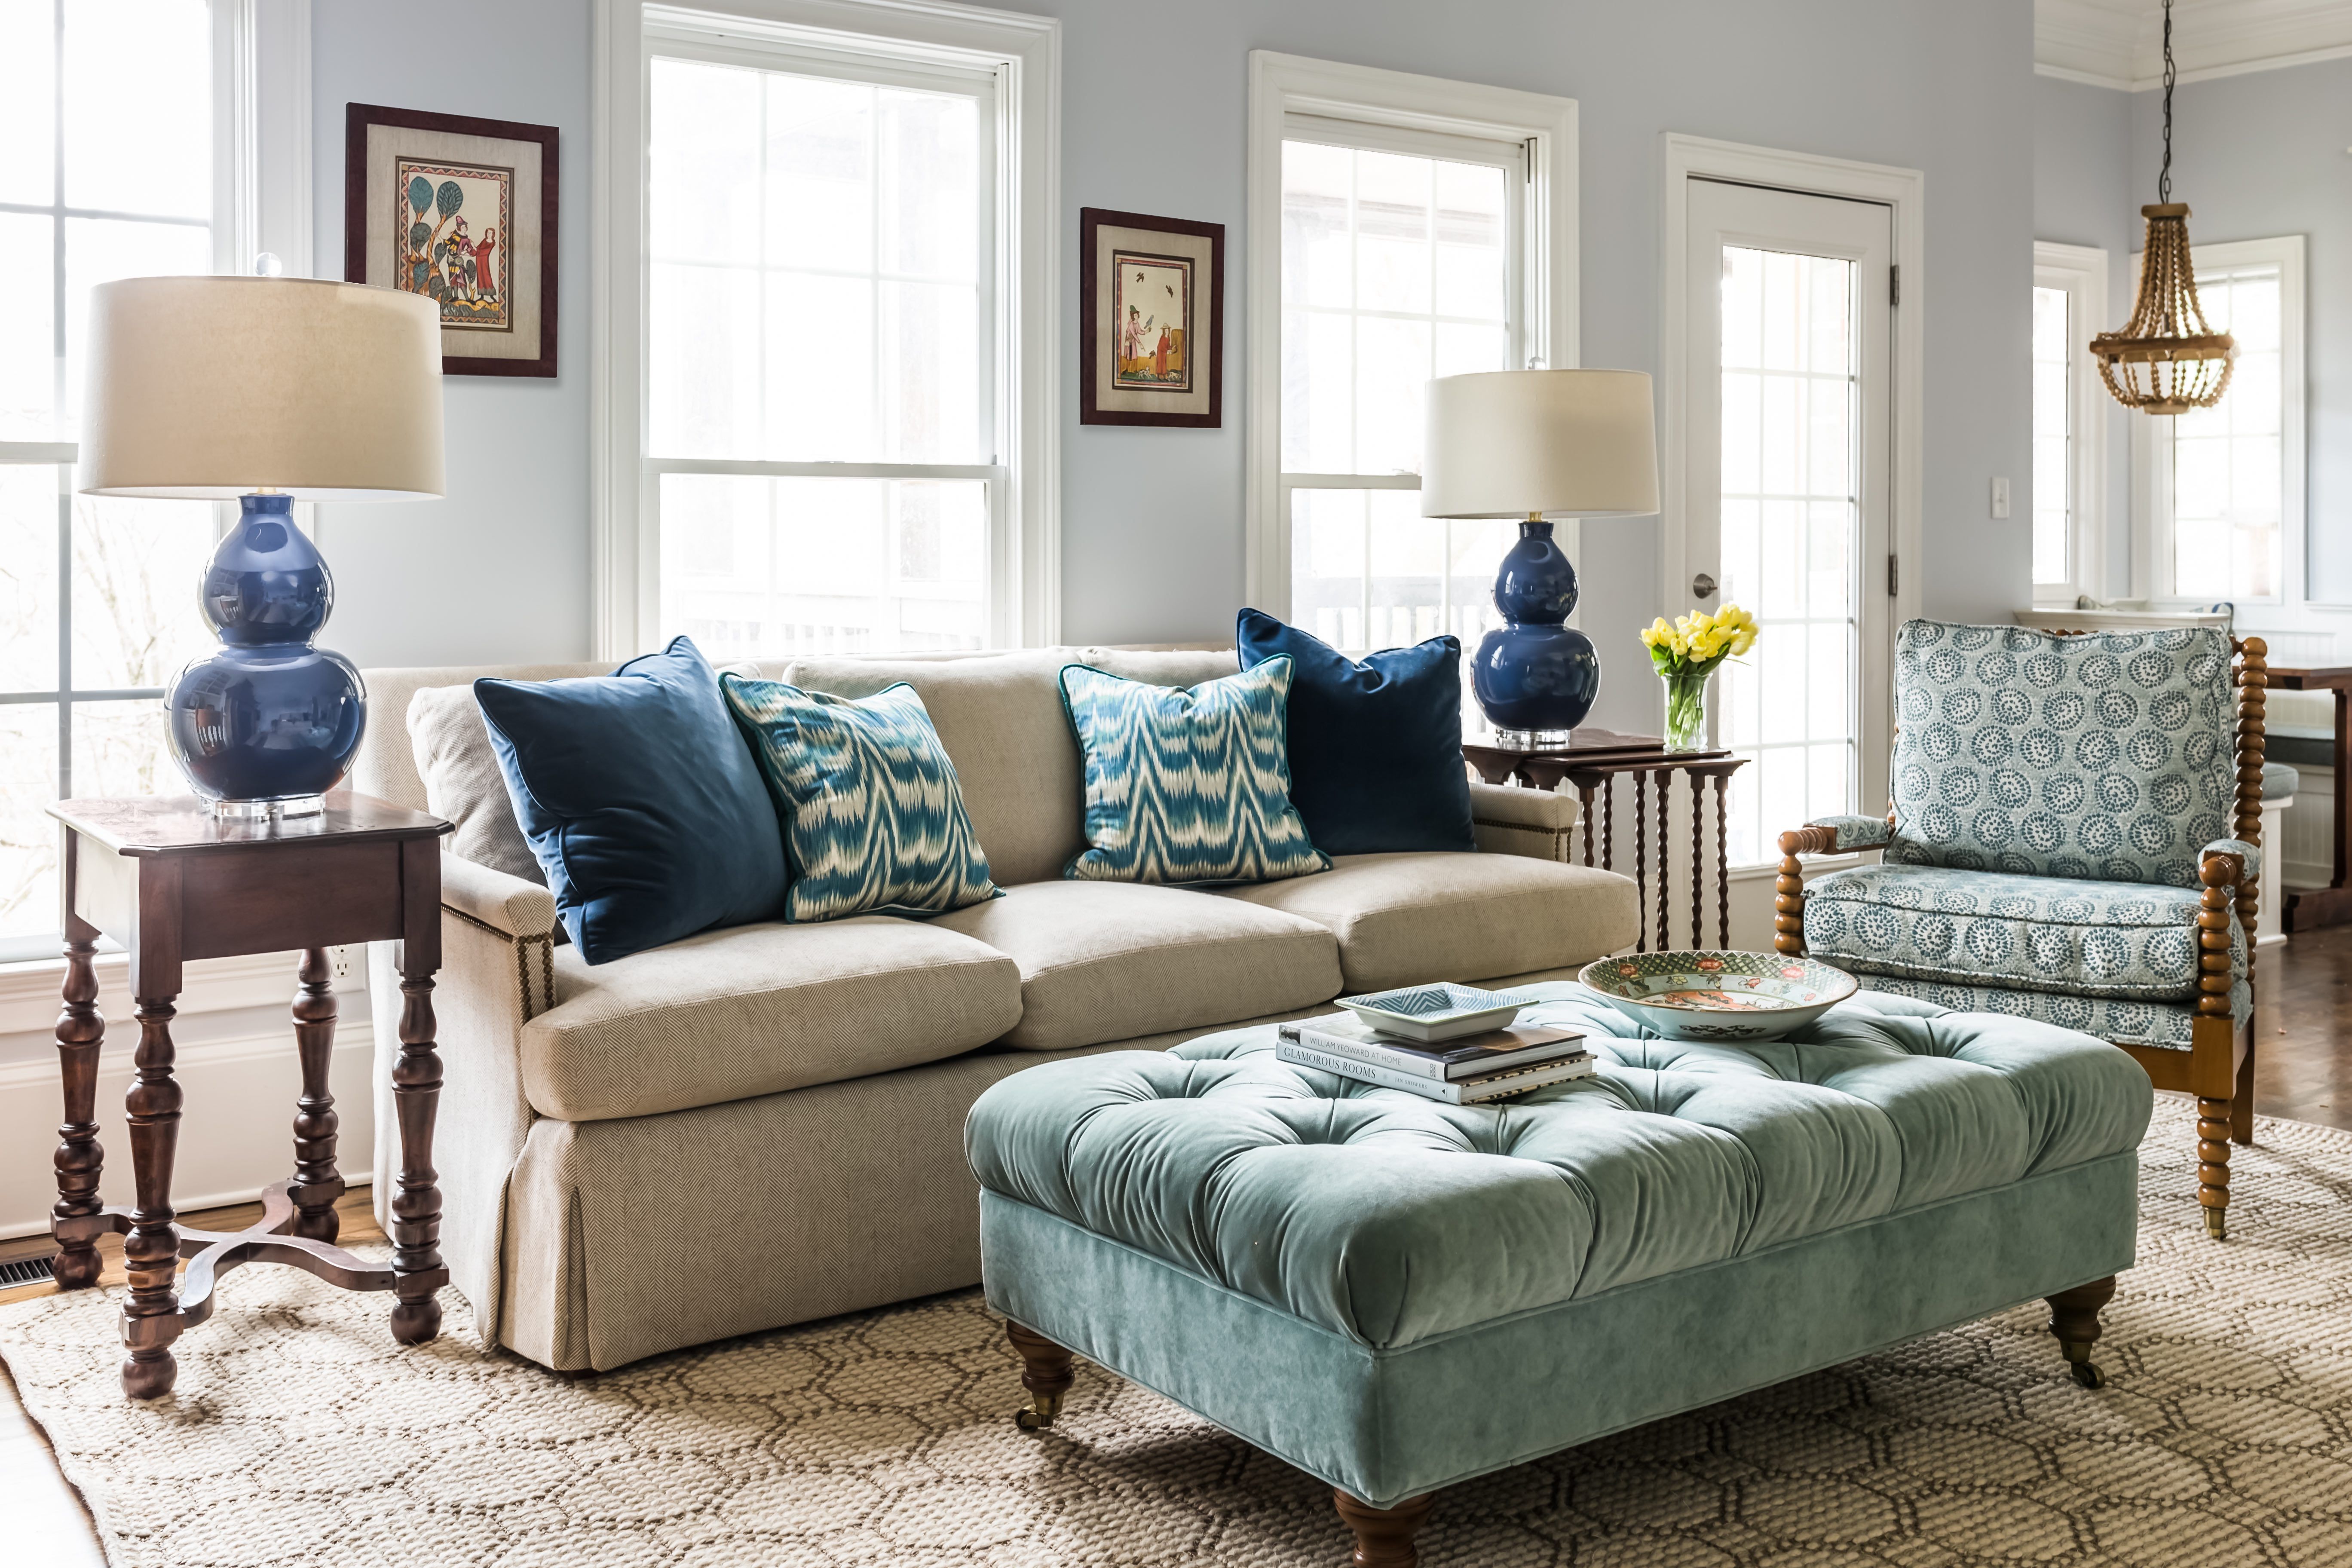 How To Mix And Match Living Room Furniture